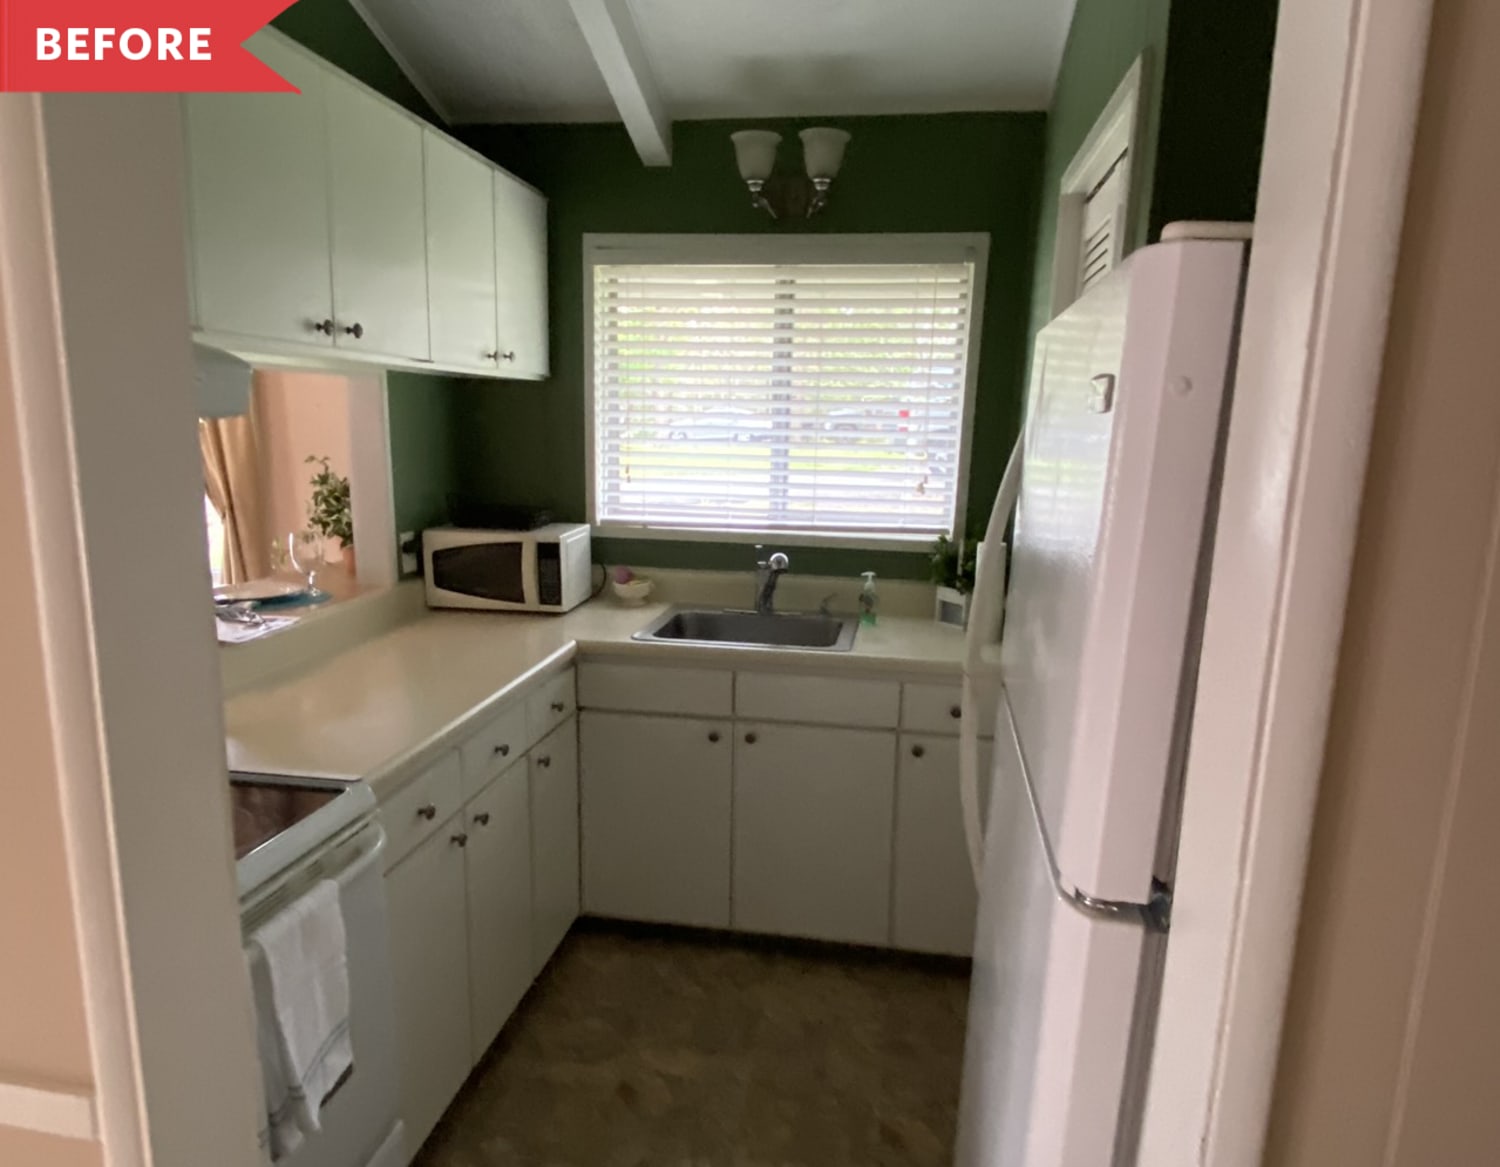 Before and After: A Tiny Cottage Kitchen Gets a Major Expansion (and Lots More Storage)